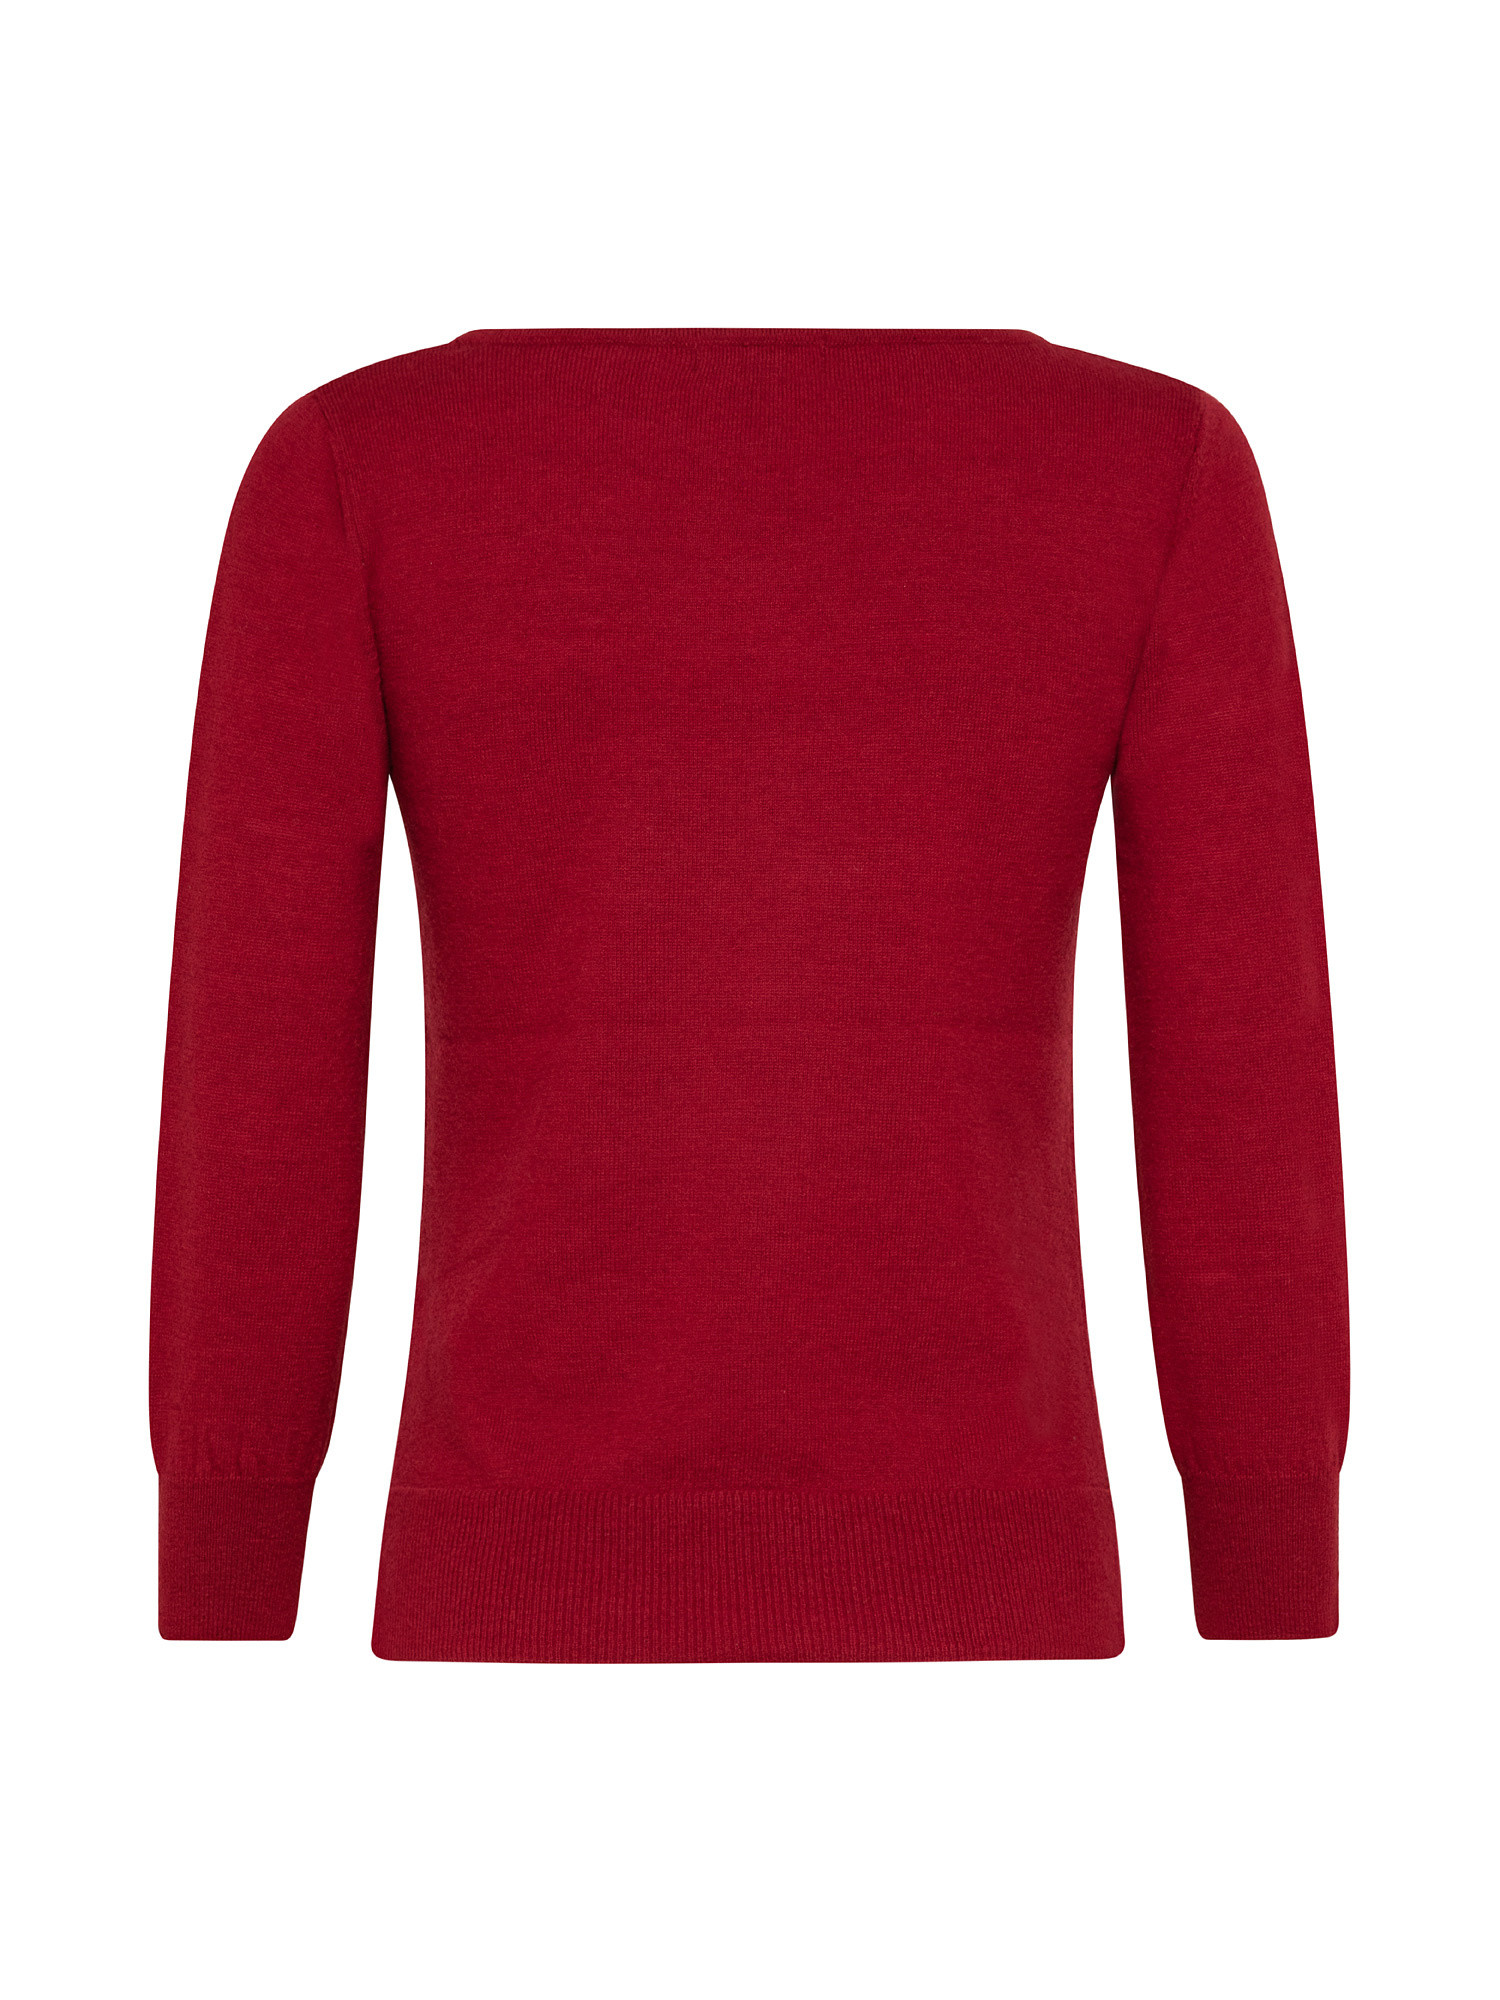 Crewneck sweater, Red, large image number 1